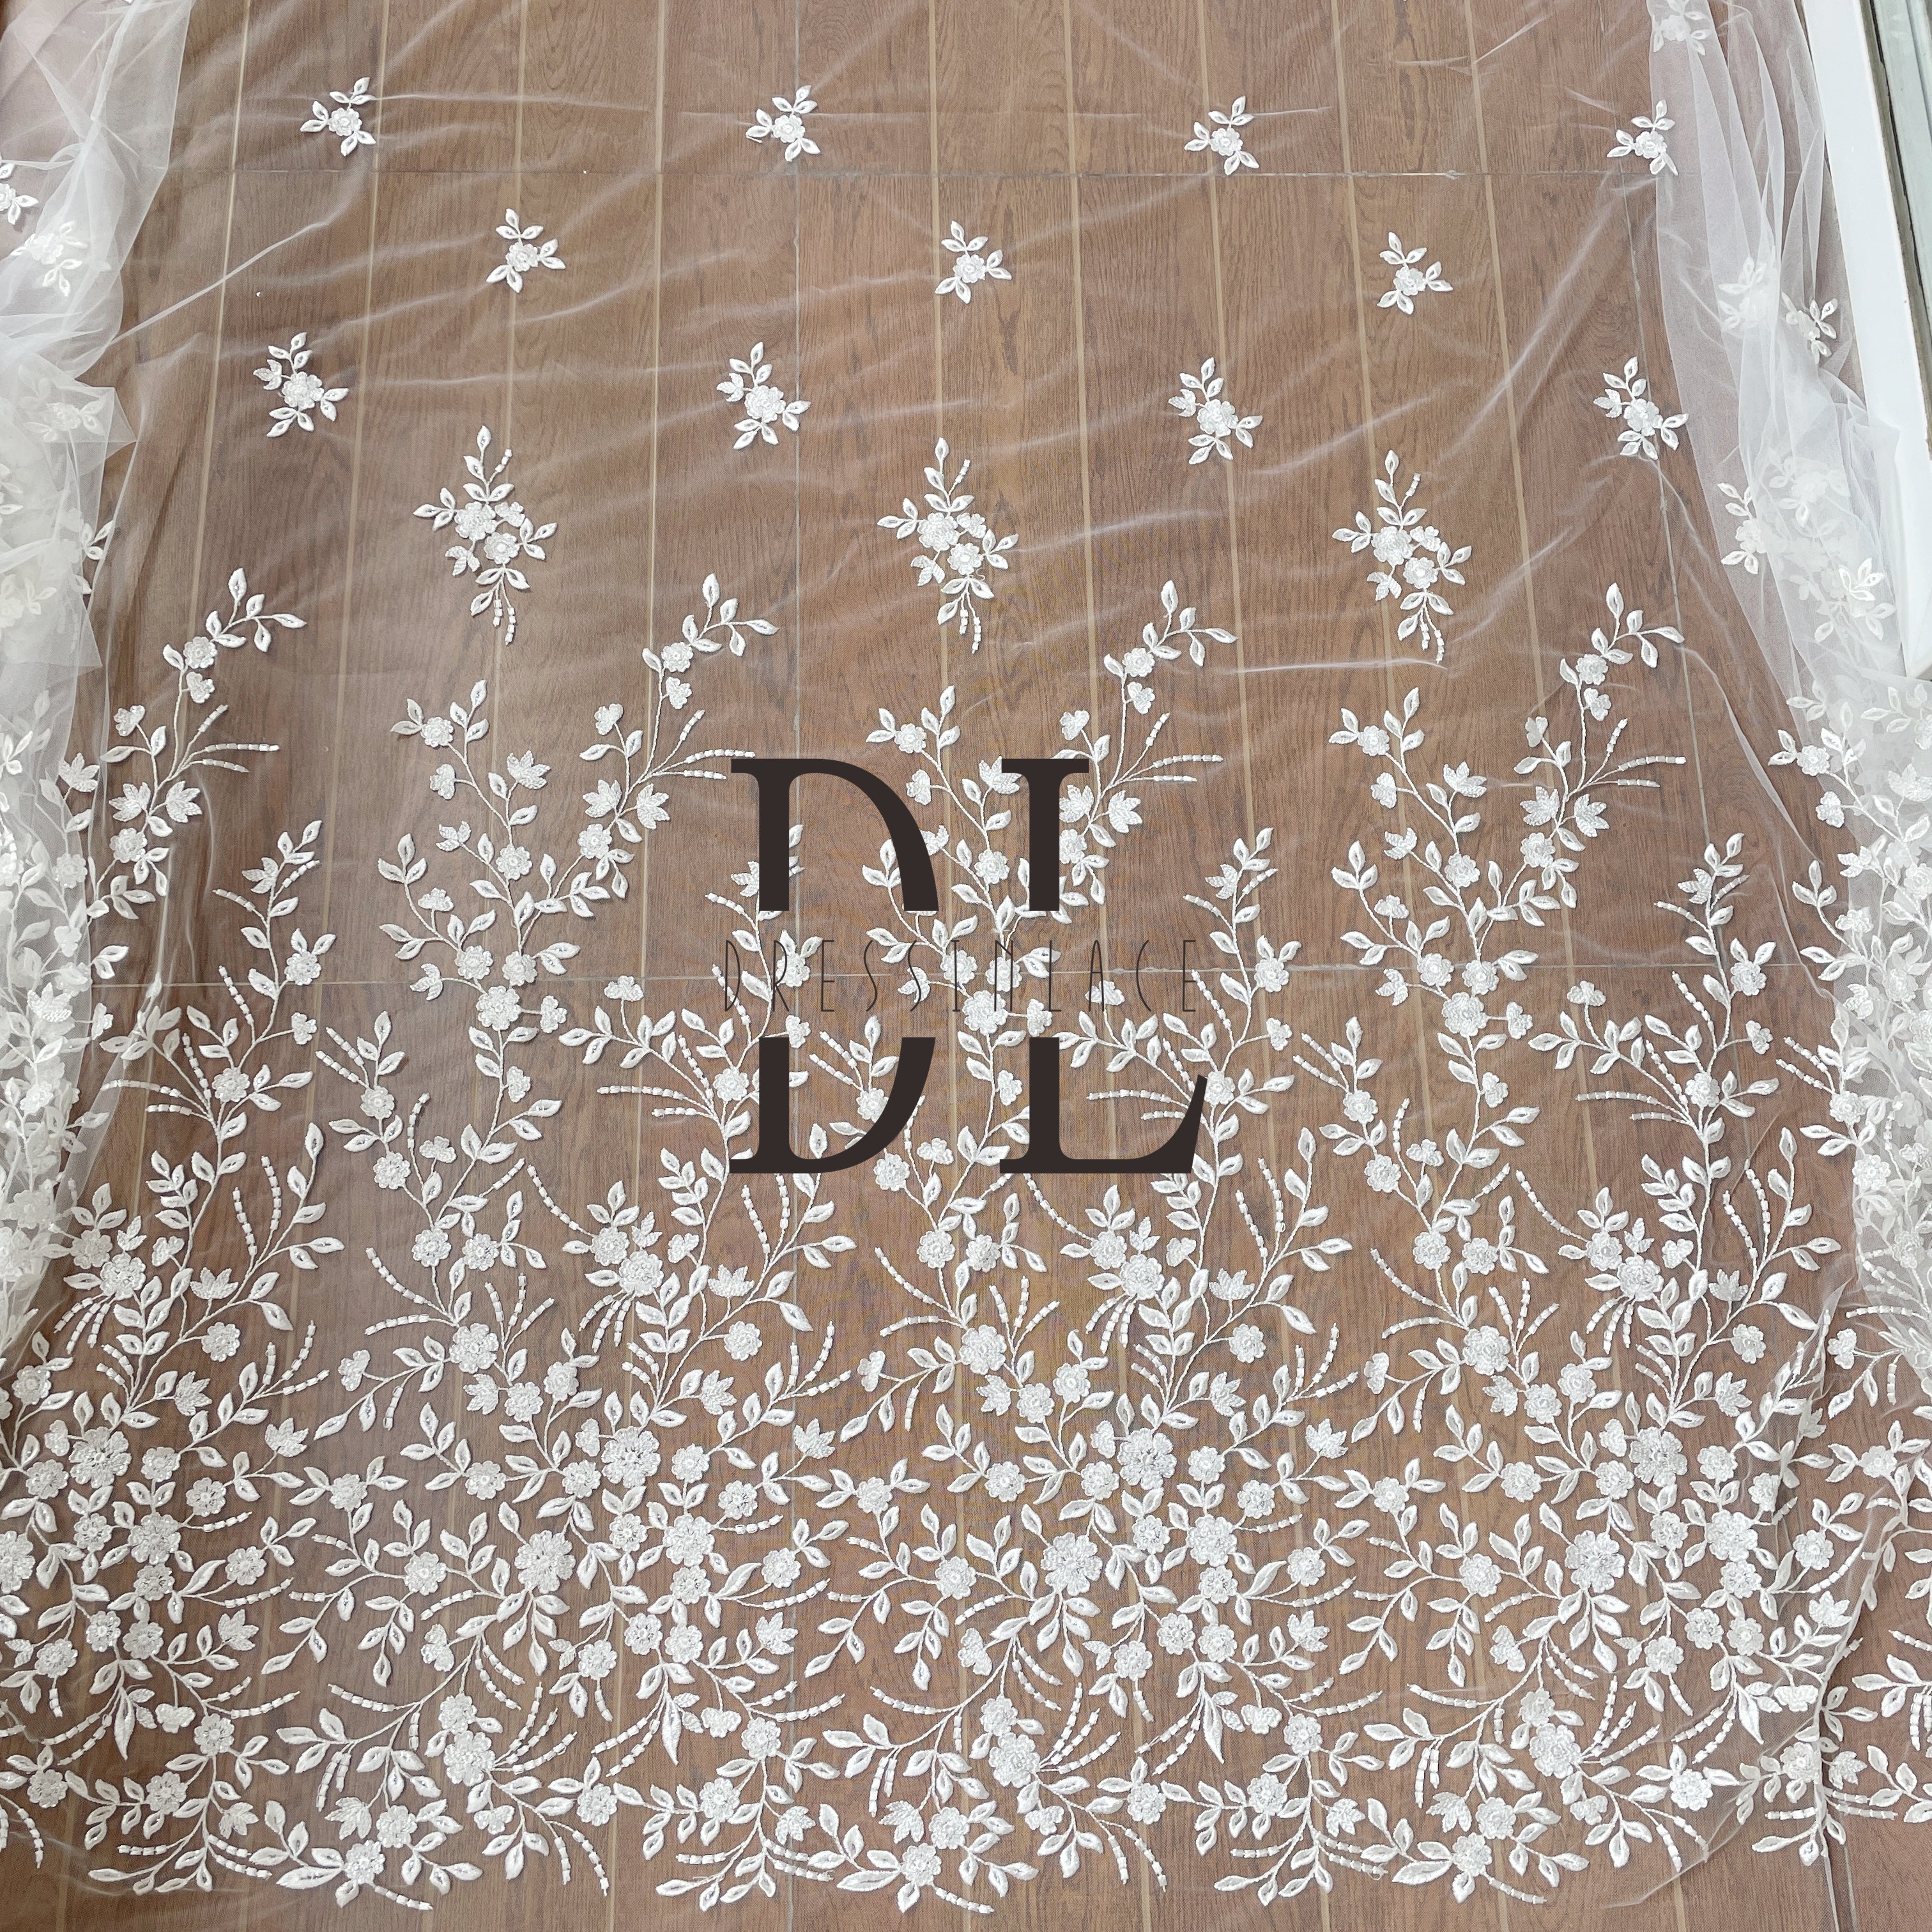 DL130044 Elegant Embroidery Lace Fabric with Simple Floral Design and Sparkling Sequins DL130044